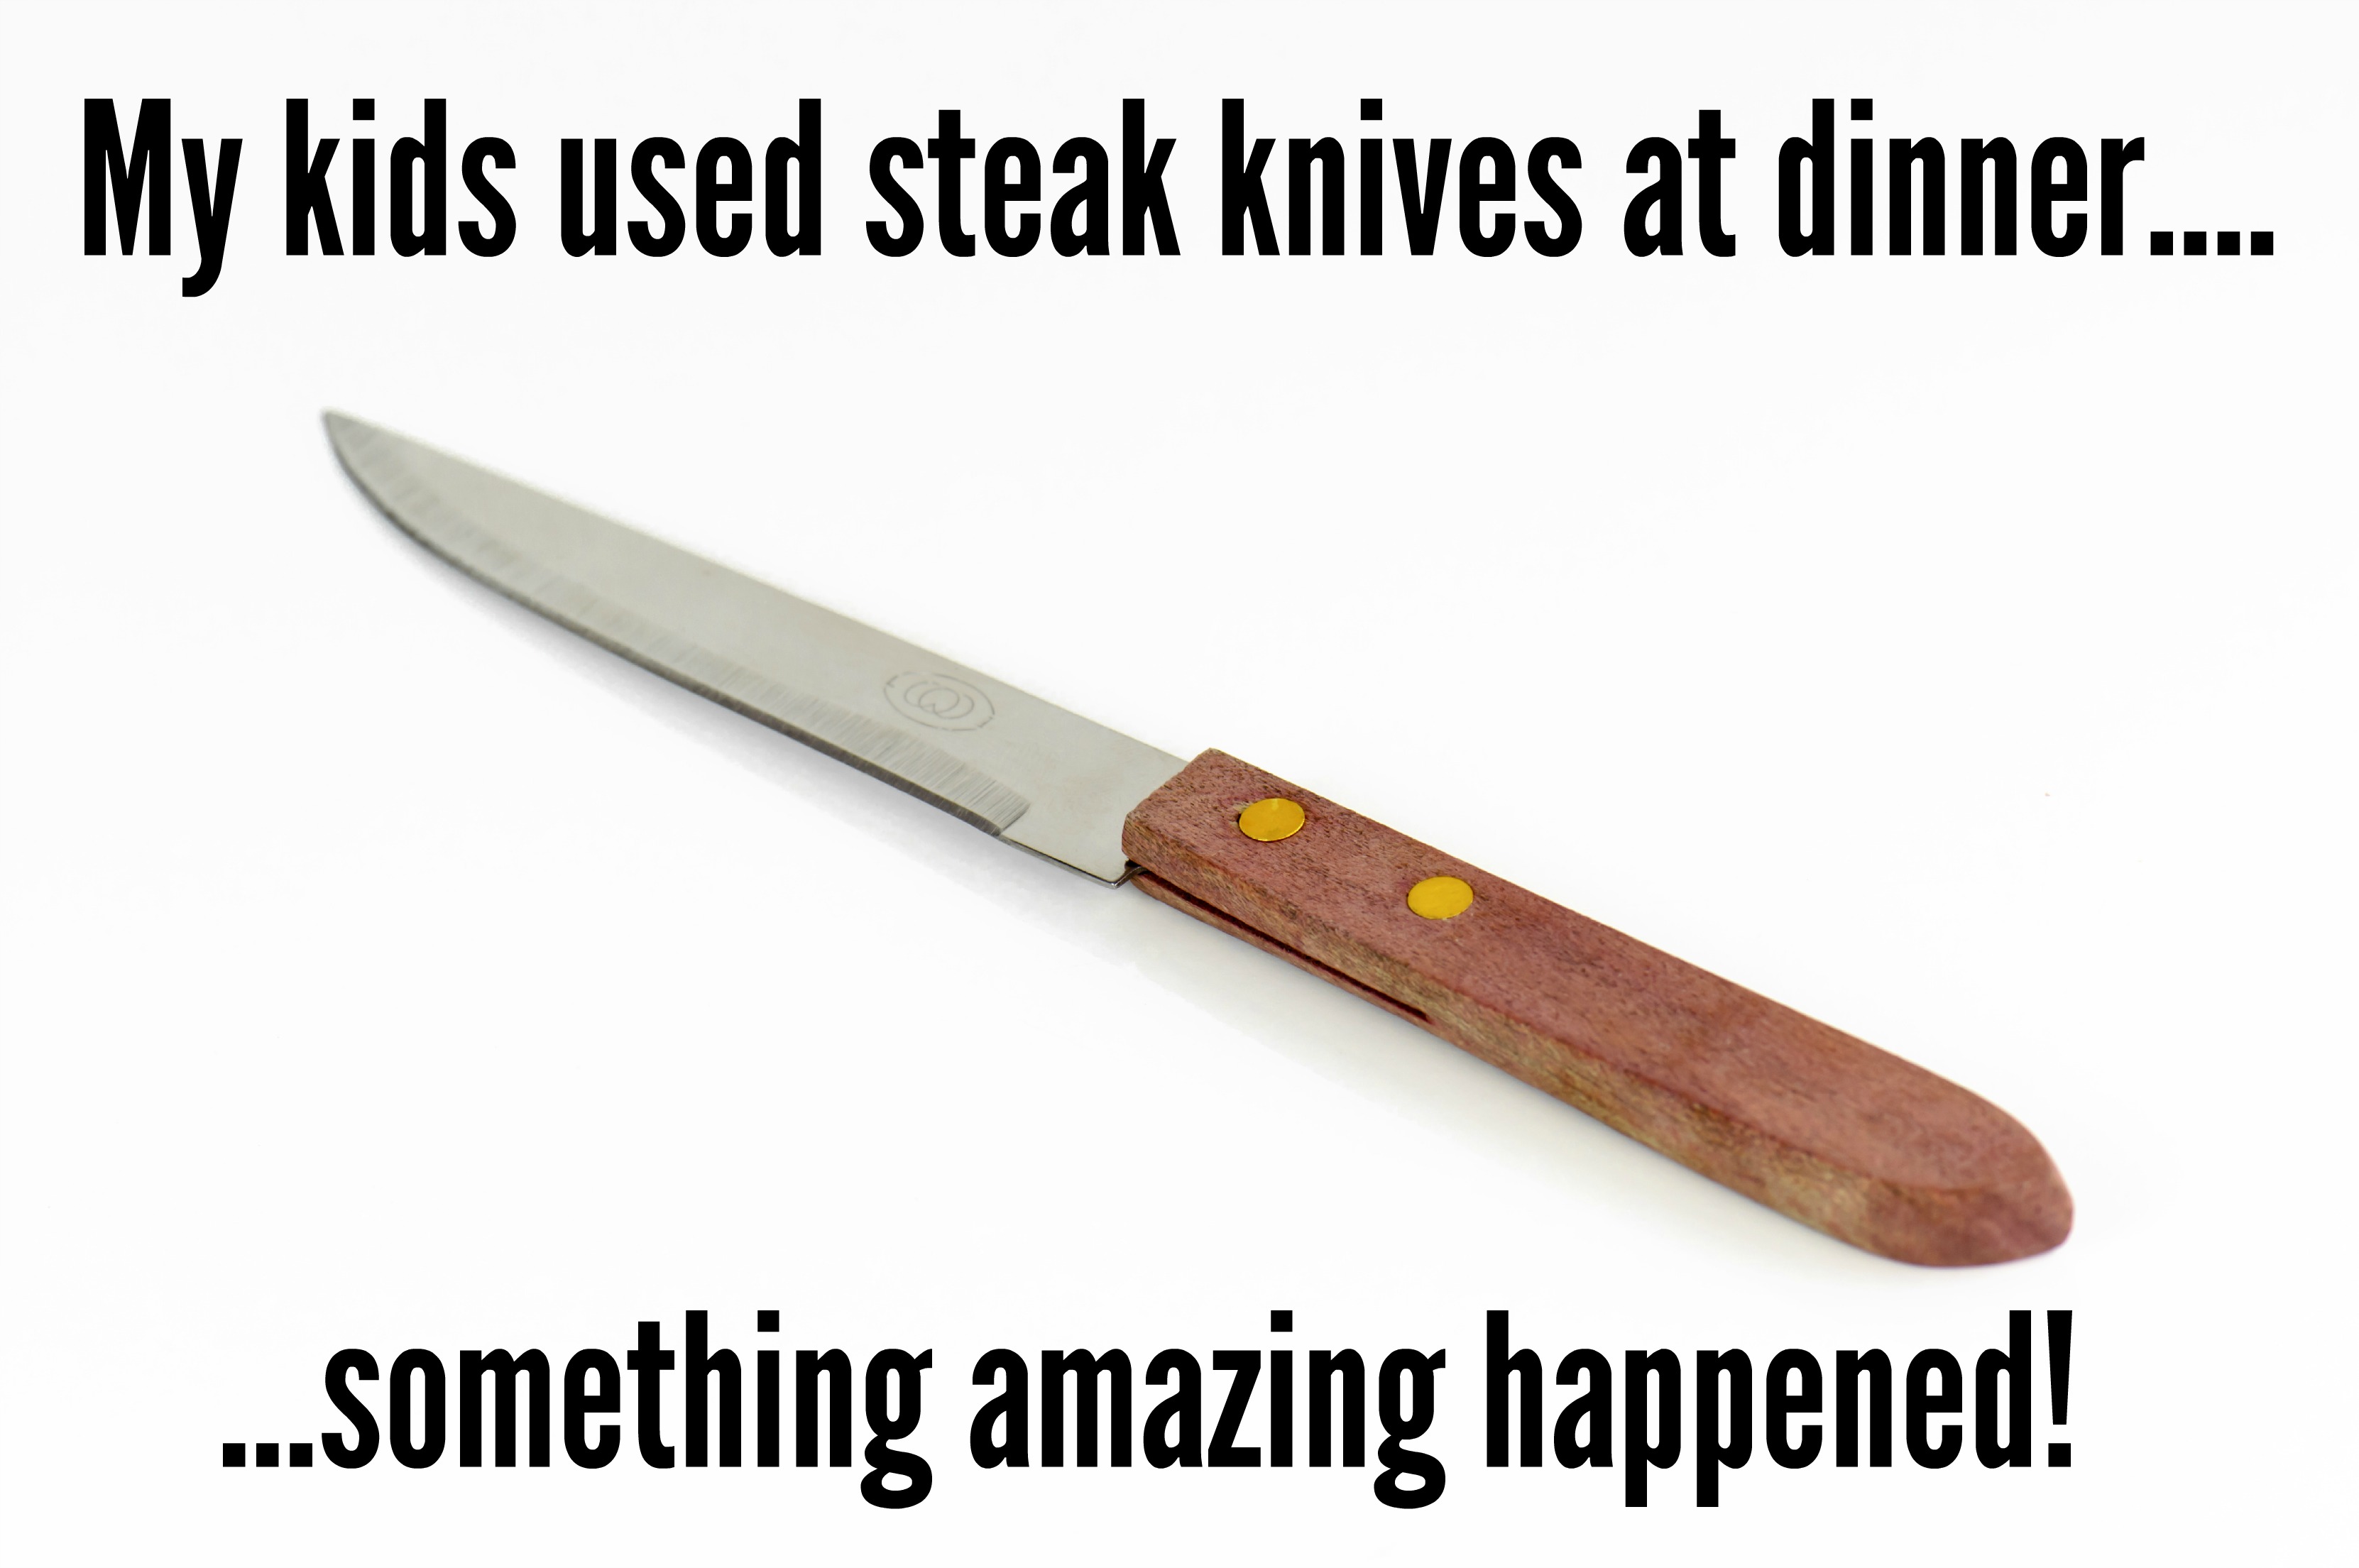 My kids used steak knives at dinner and something amazing happened